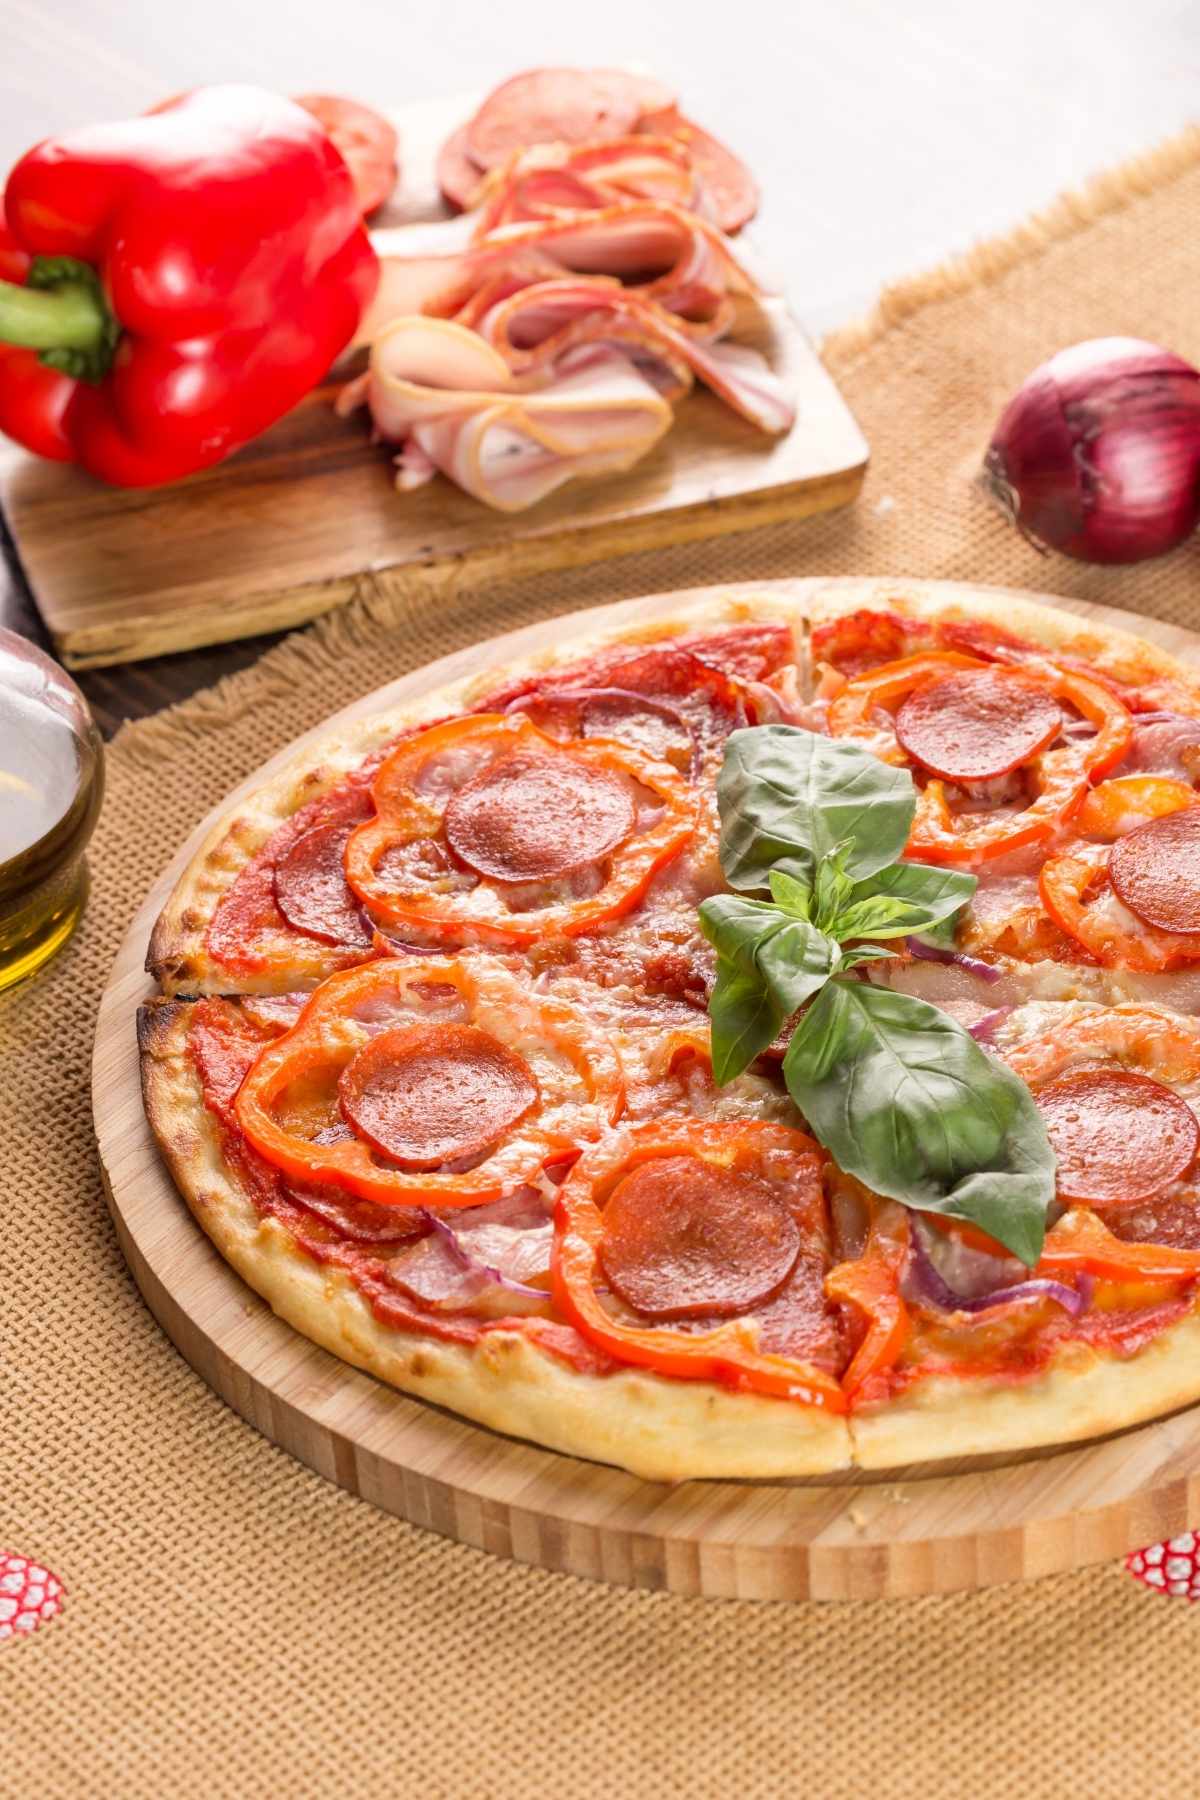 Pepperoni could in fact be made of pork, beef, or both. There are also other varieties like those that are strictly beef or strictly turkey. 